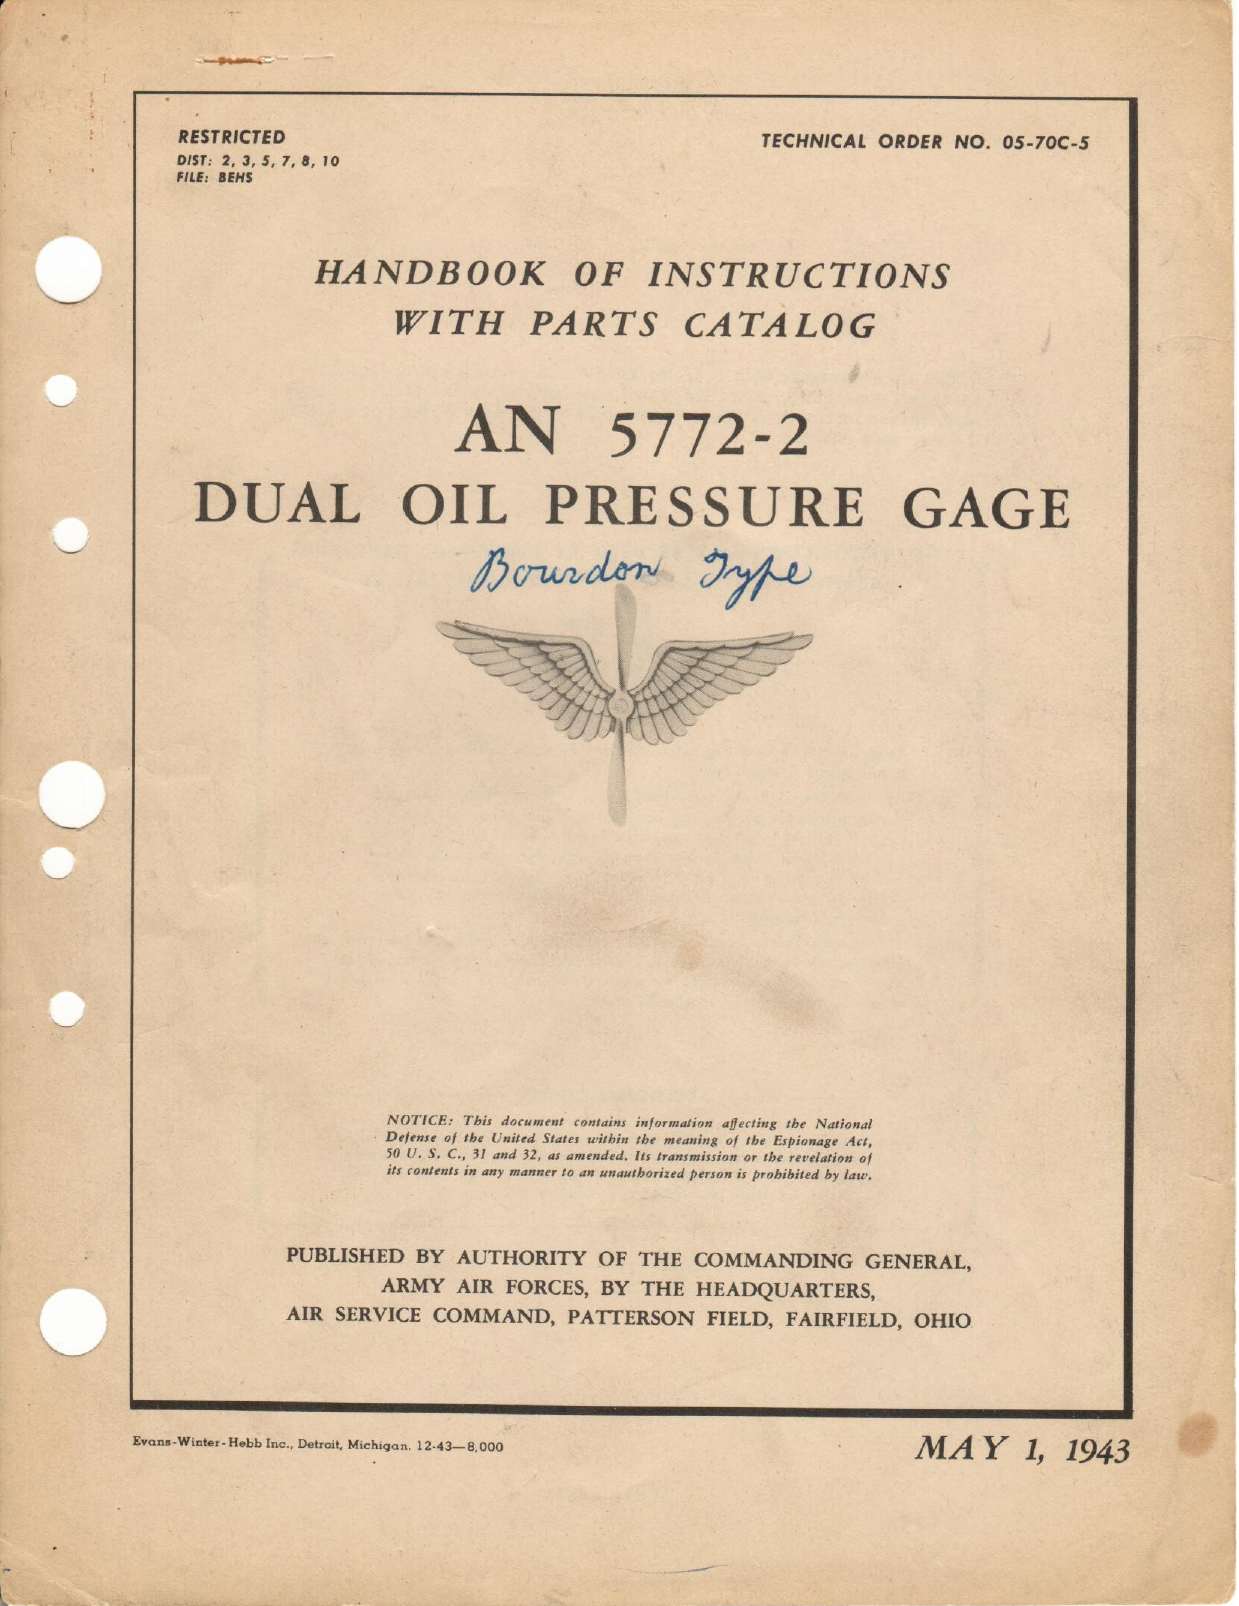 Sample page 1 from AirCorps Library document: Instructions with Parts Catalog for AN 5772-2 Oil Pressure Gage